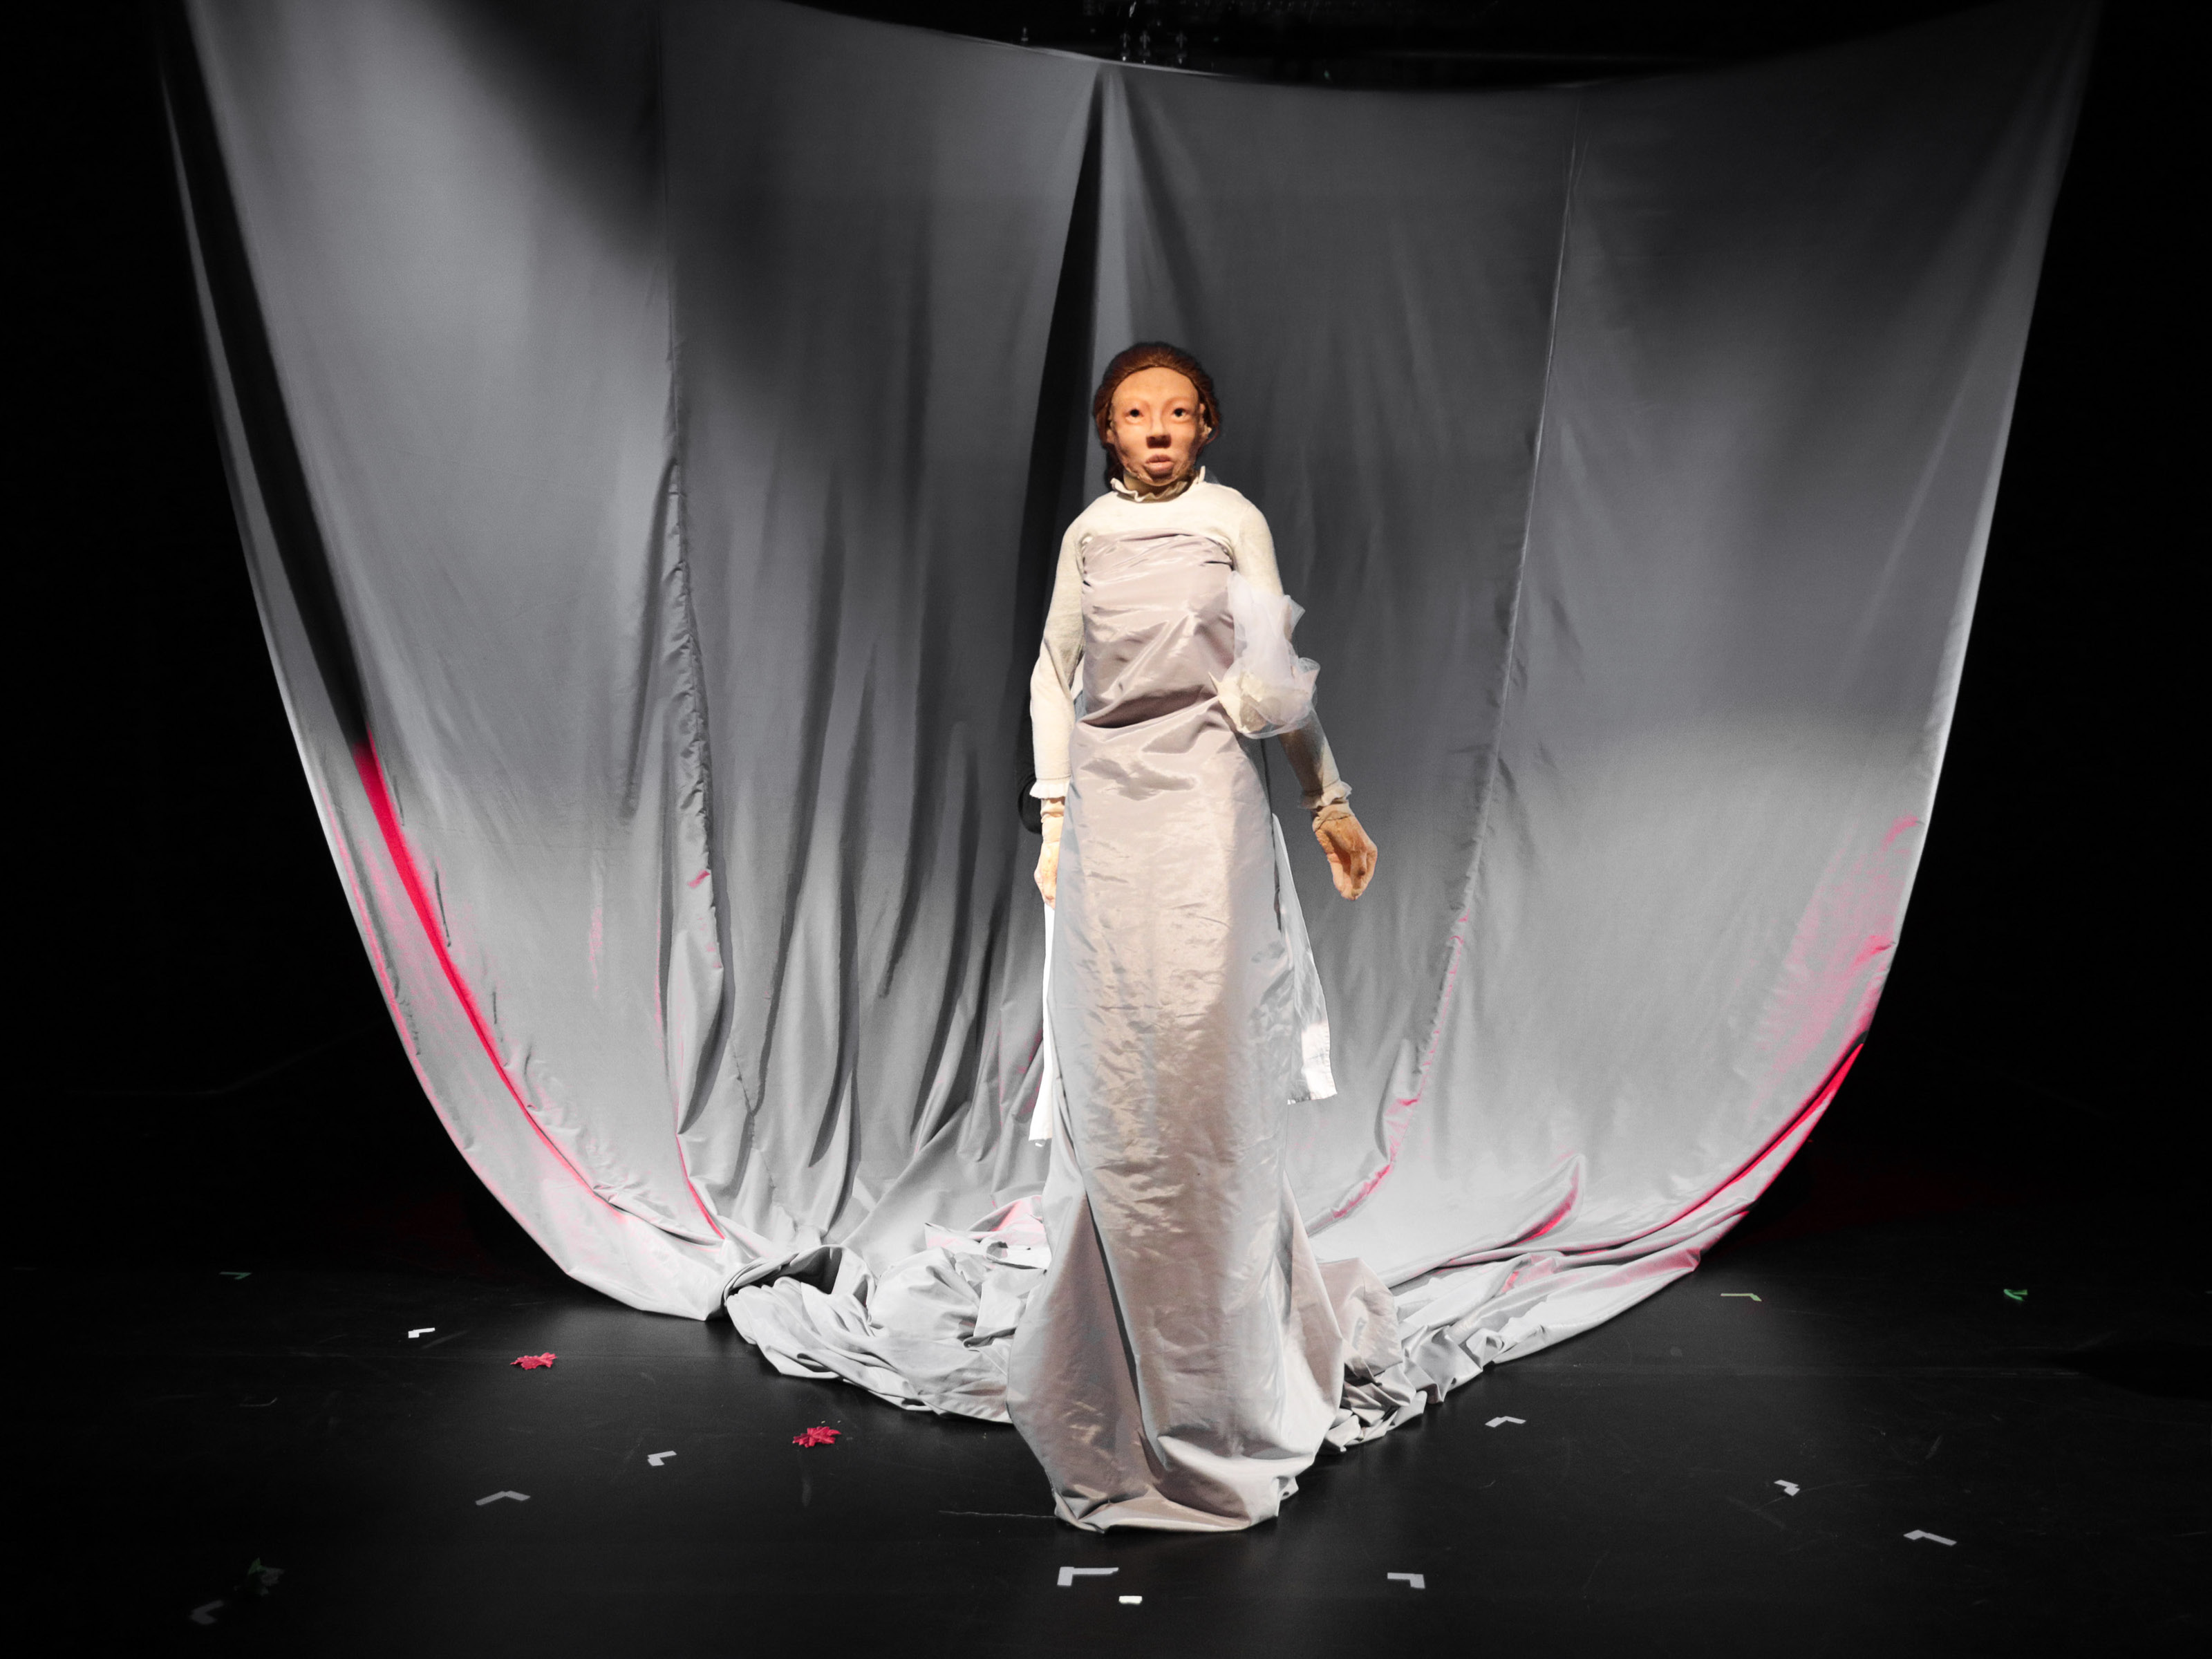 Helga's doll is wrapped in ghostly, slightly transparent white cloth. She wears a white KLeid and floats over the stage floor.